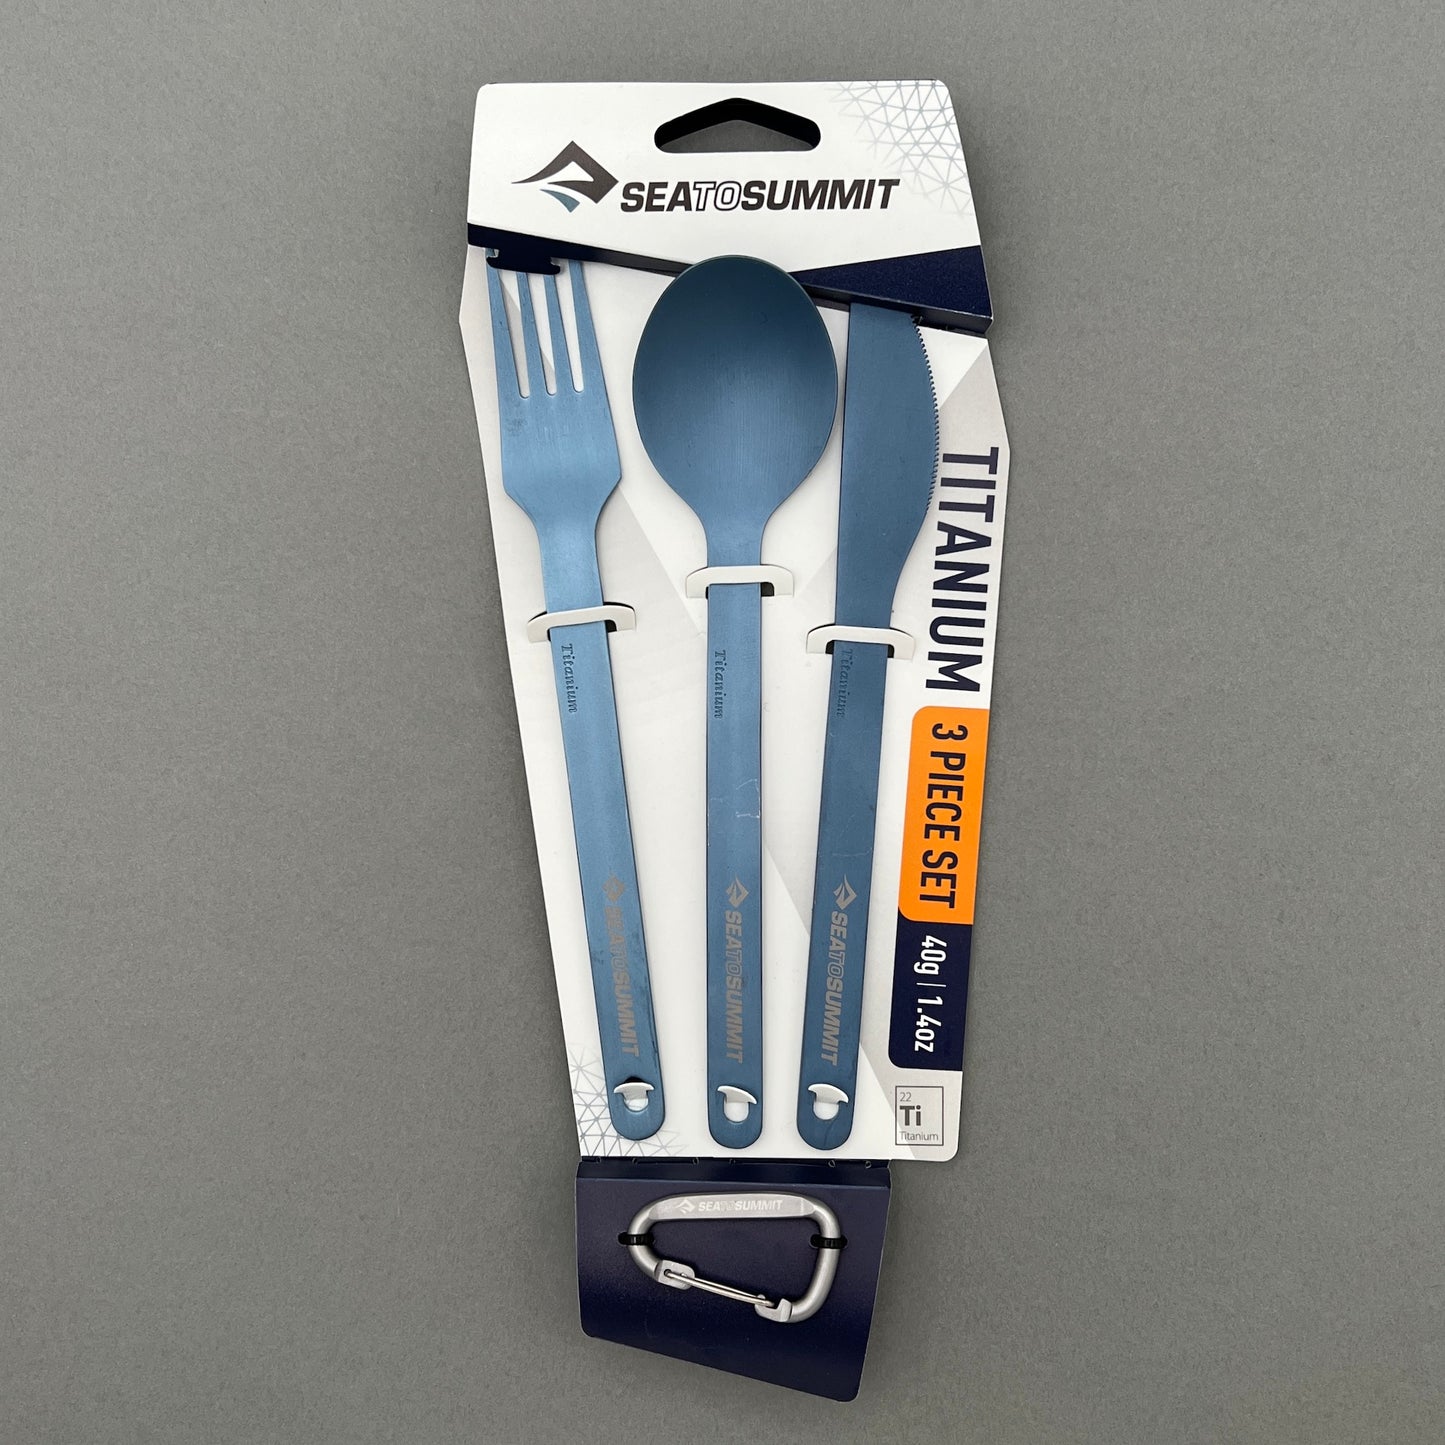 A three piece titanium cutlery set containing a fork, knife, spoon as well as a small carabiner in its package from Sea to Summit laying on a gray background